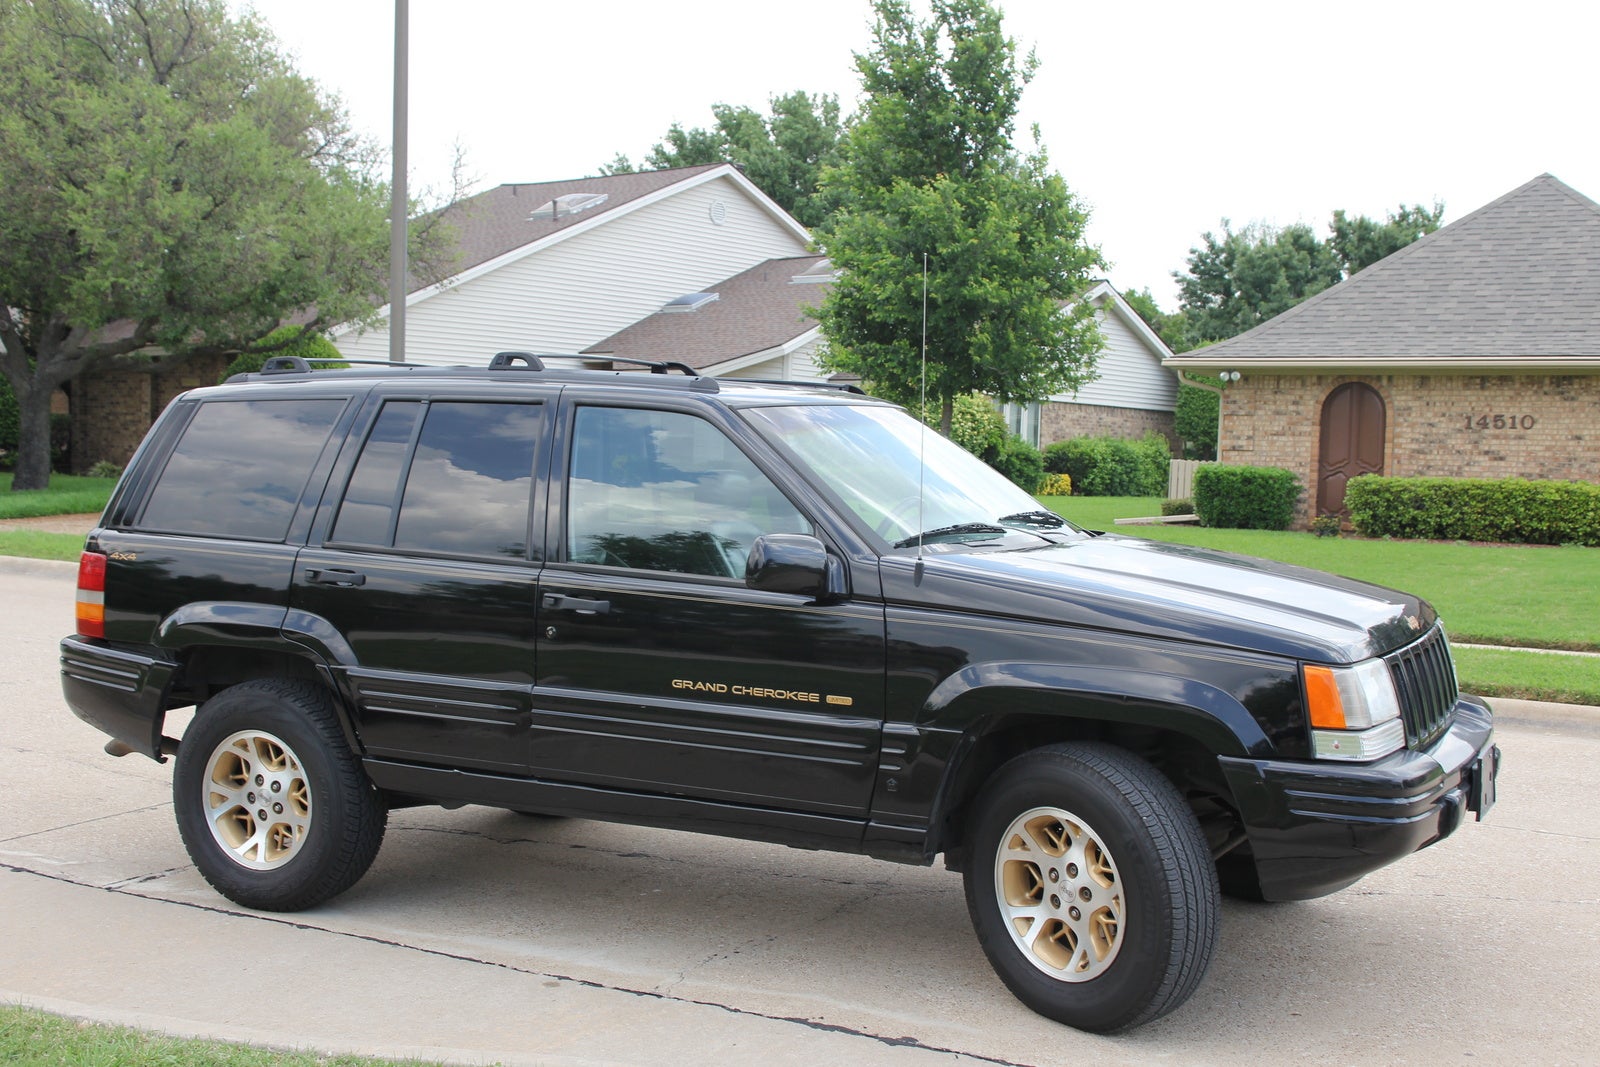 1996 Jeep grand cherokee limited specifications #4